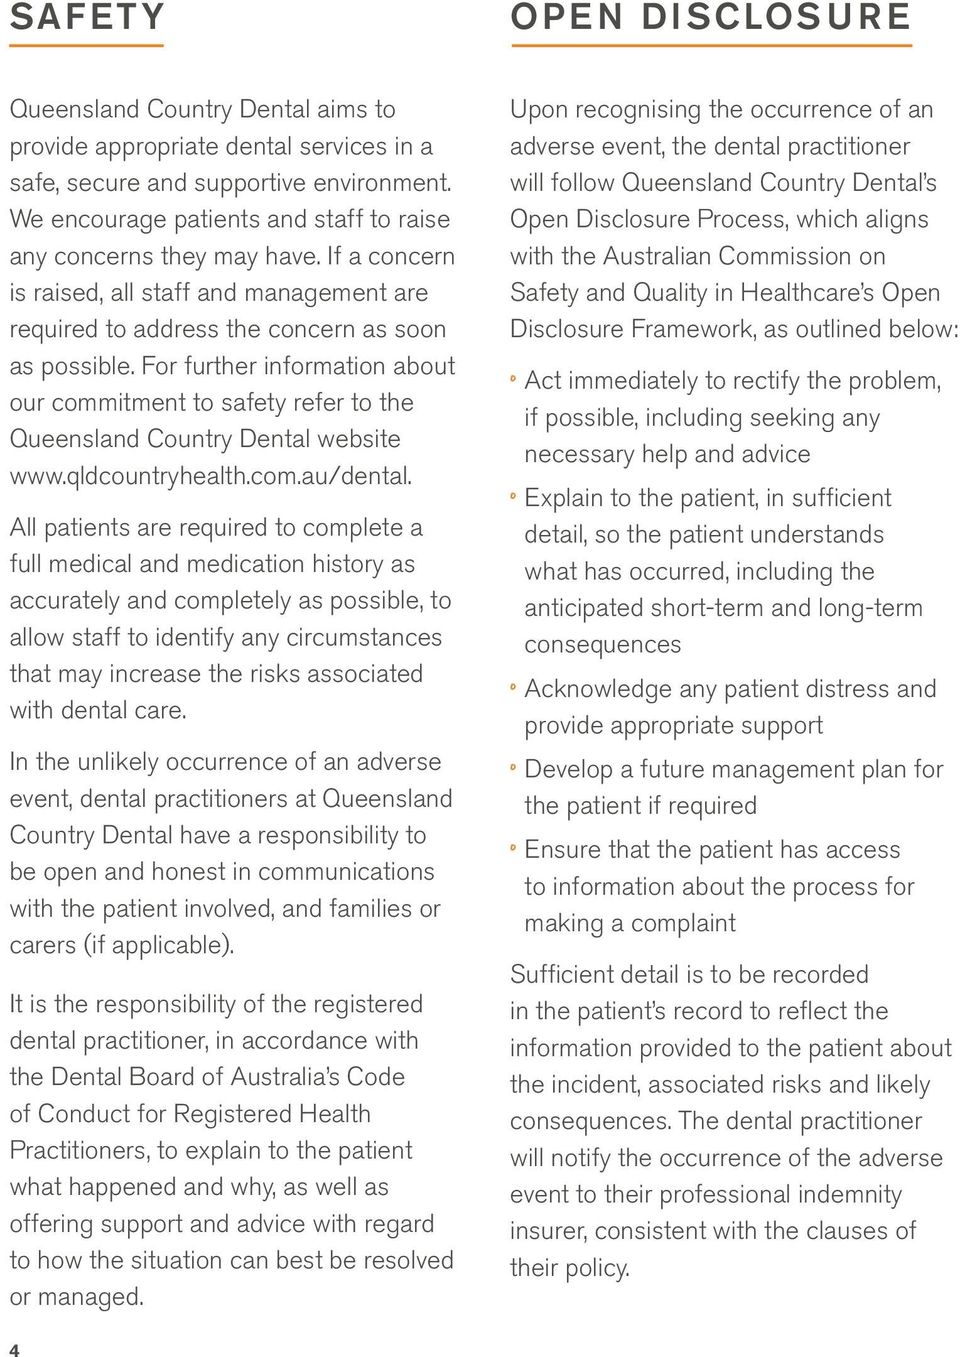 For further information about our commitment to safety refer to the Queensland Country Dental website www.qldcountryhealth.com.au/dental.